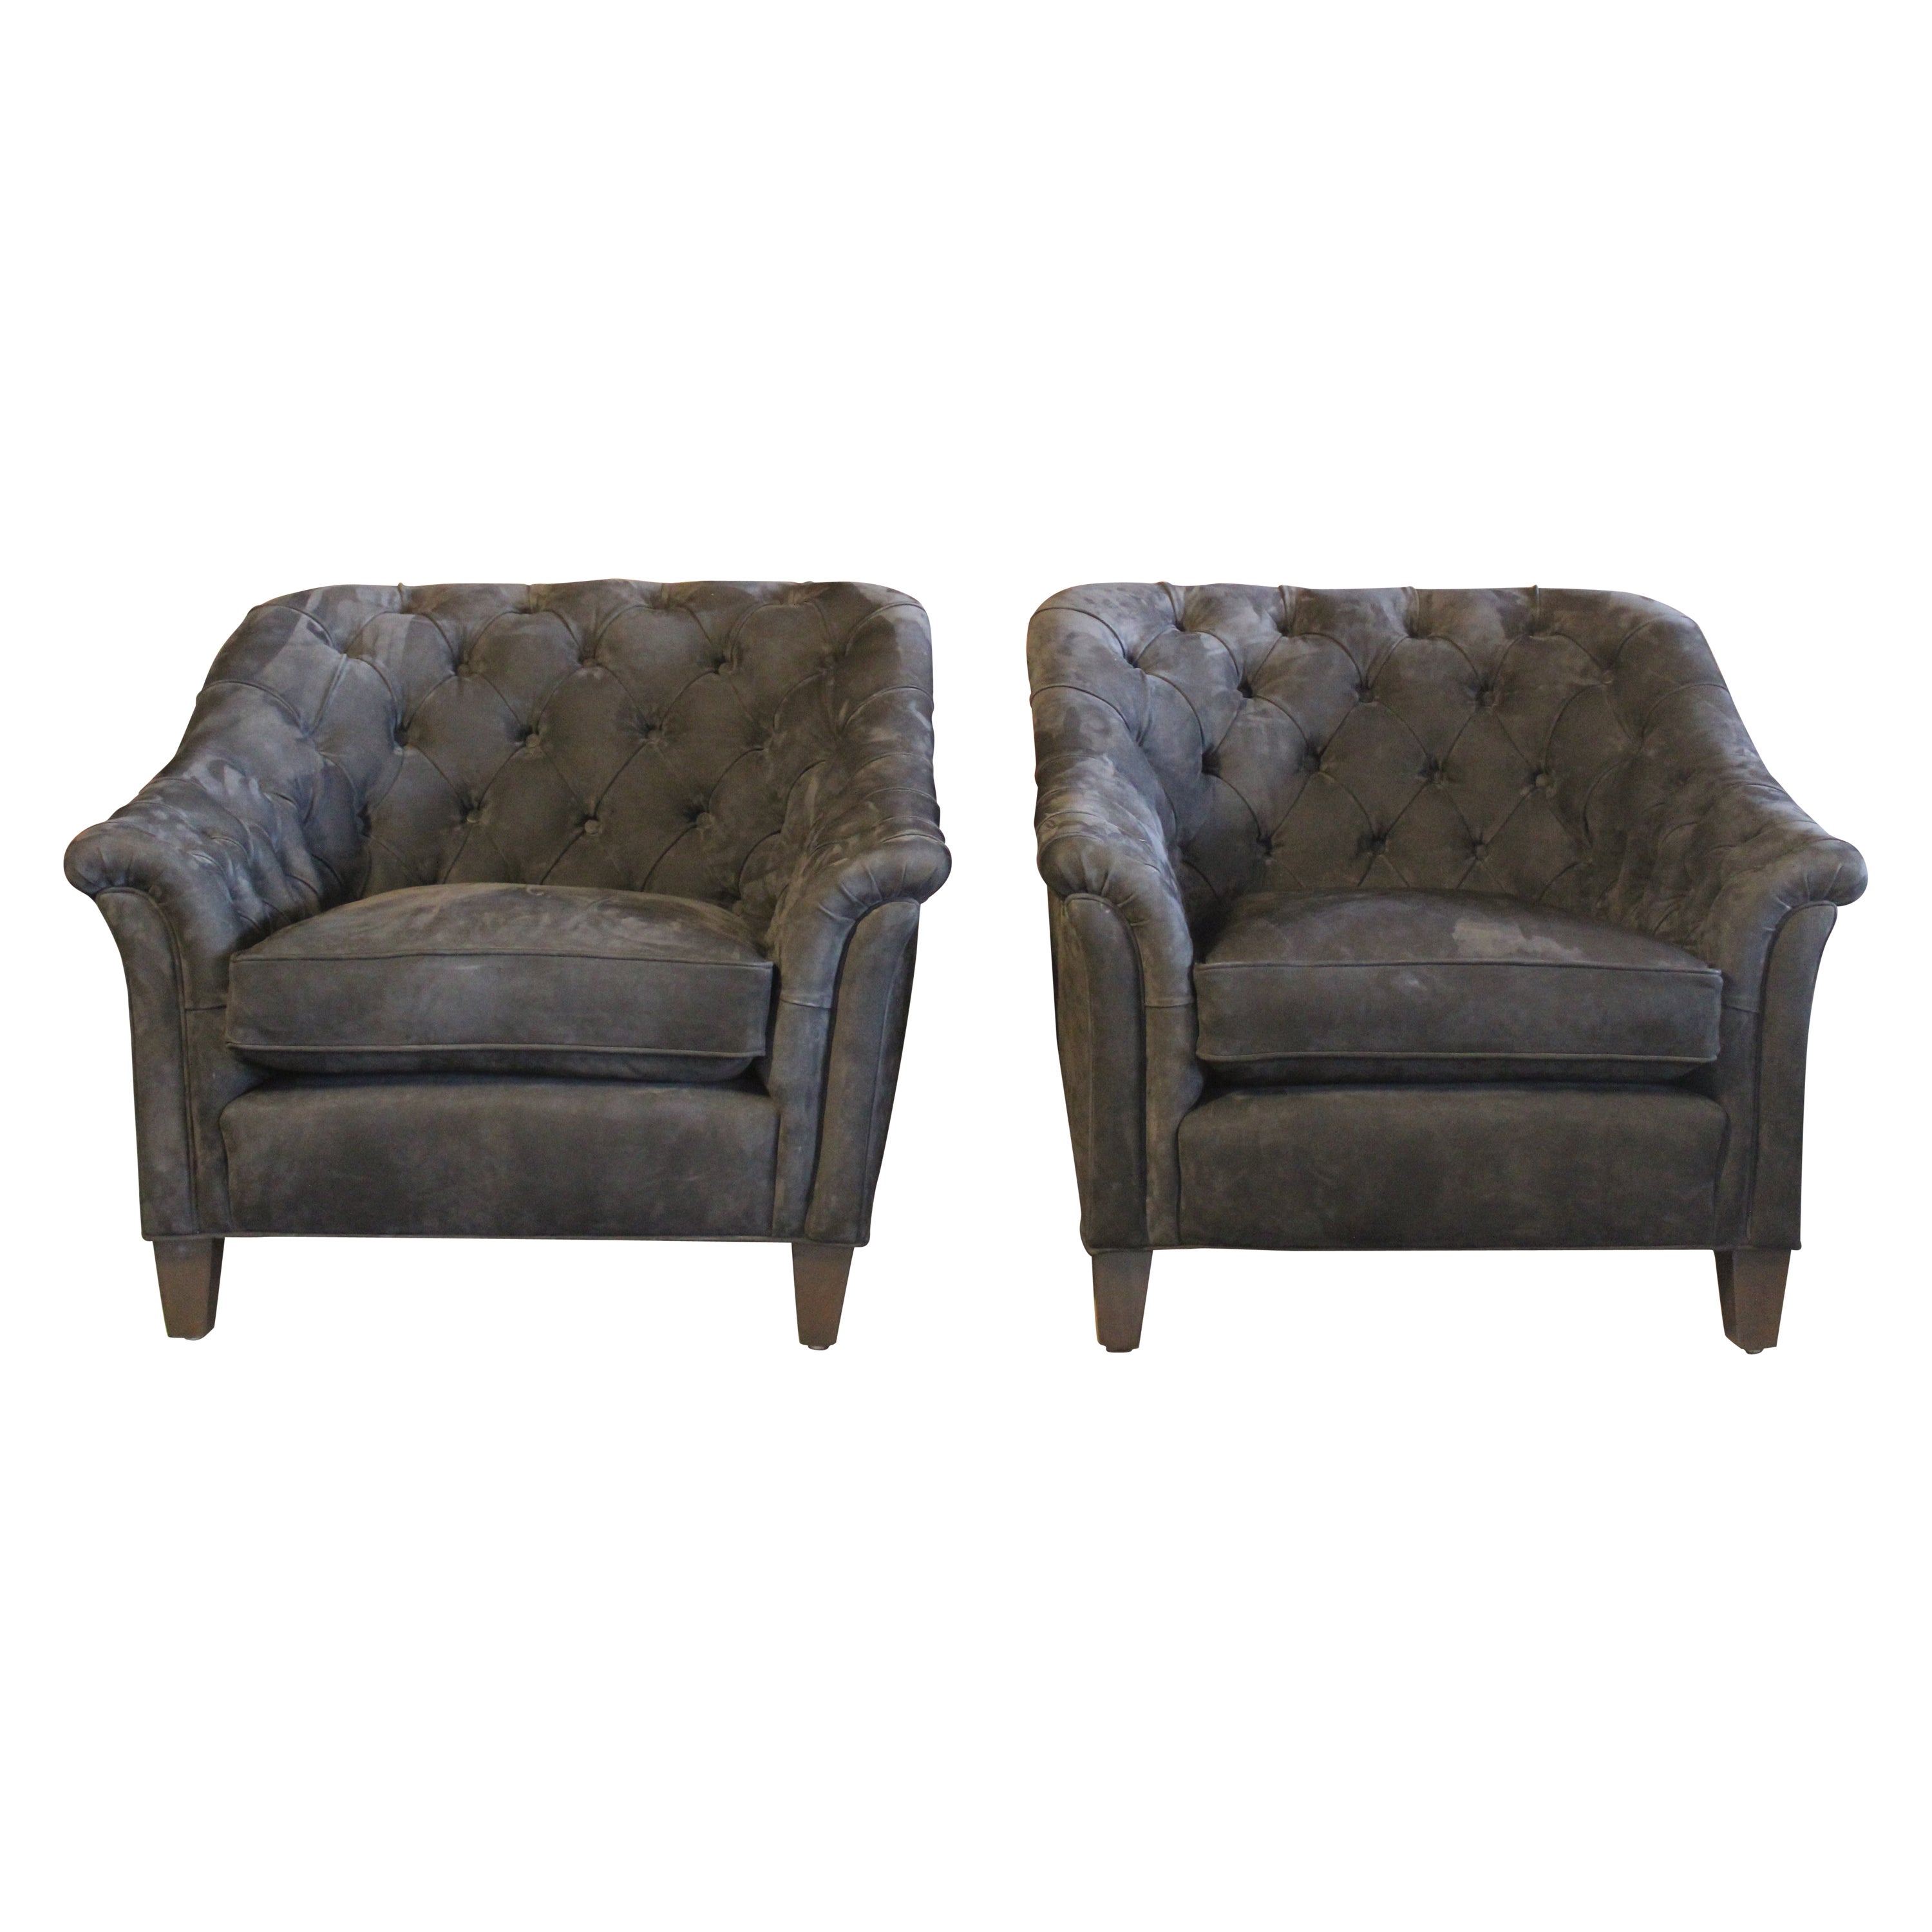 Pair of Tufted Leather Club Chairs, France, 1960s For Sale